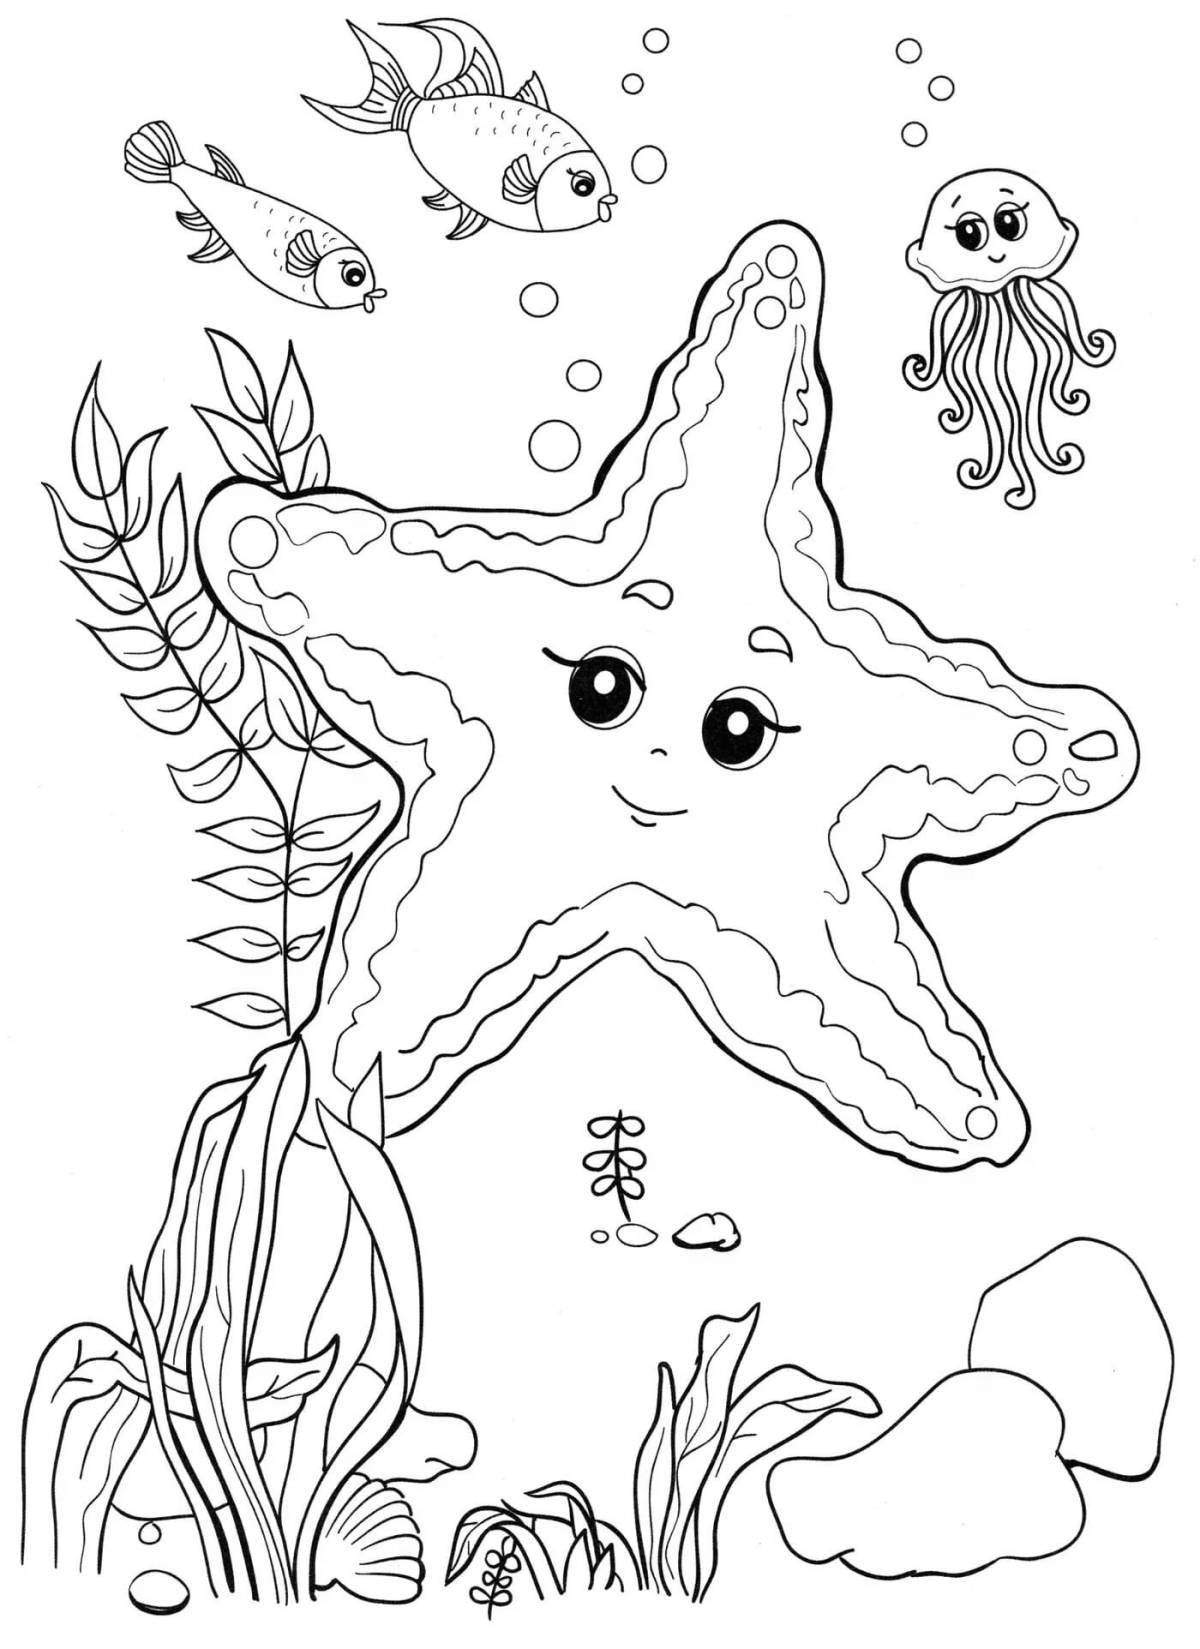 Adorable marine life coloring book for 6-7 year olds